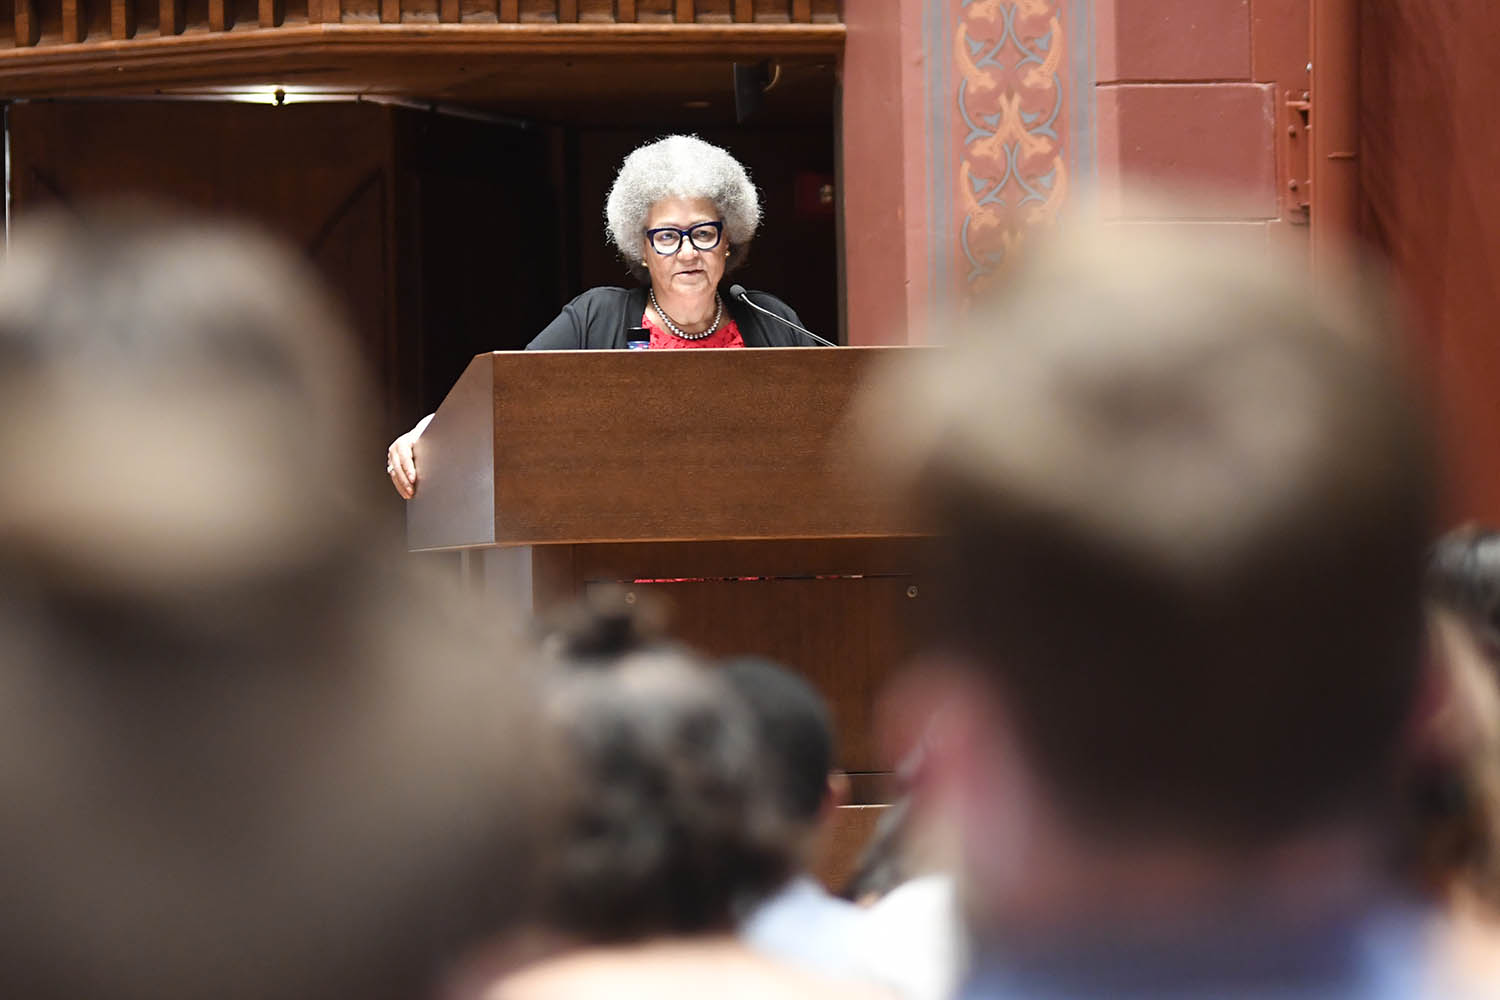 Dr. Andrea Grubb Barthwell '76, founder of Encounter Medical Group, delivered the keynote address during the Phi Beta Kappa initiation ceremony on May 21.